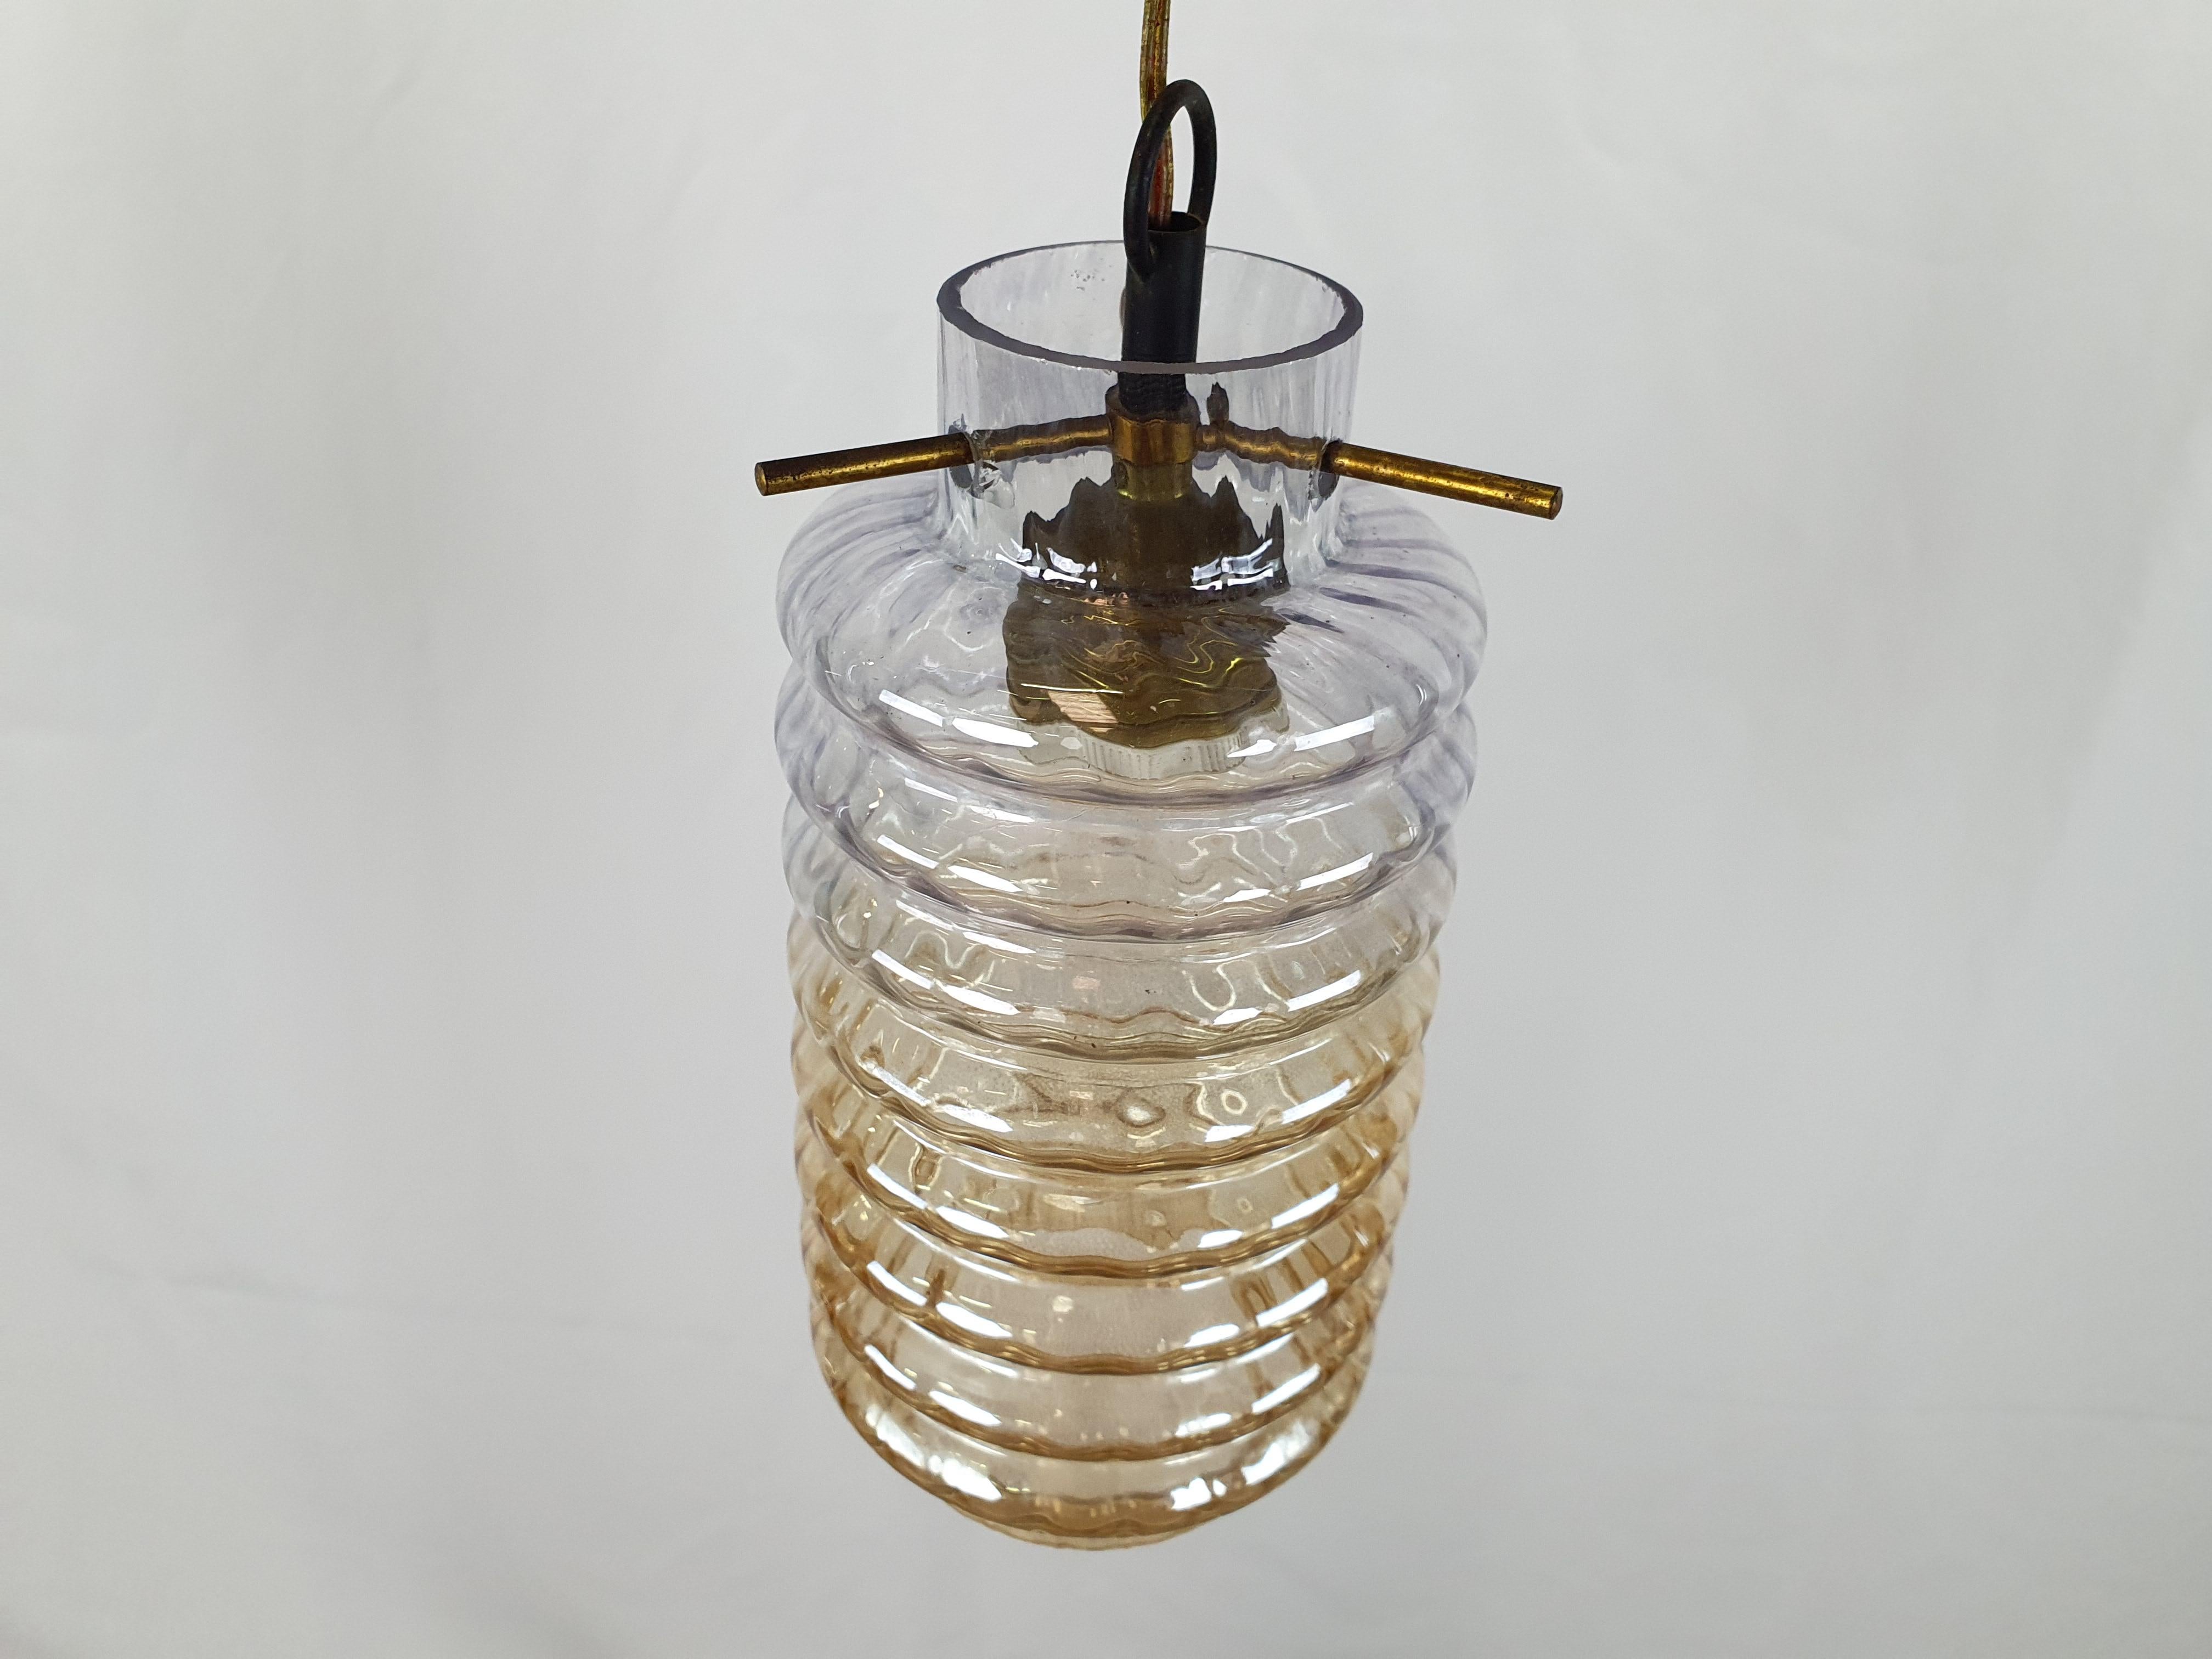 Italian Glass and Smoked Glass Chandelier from the 1970s For Sale